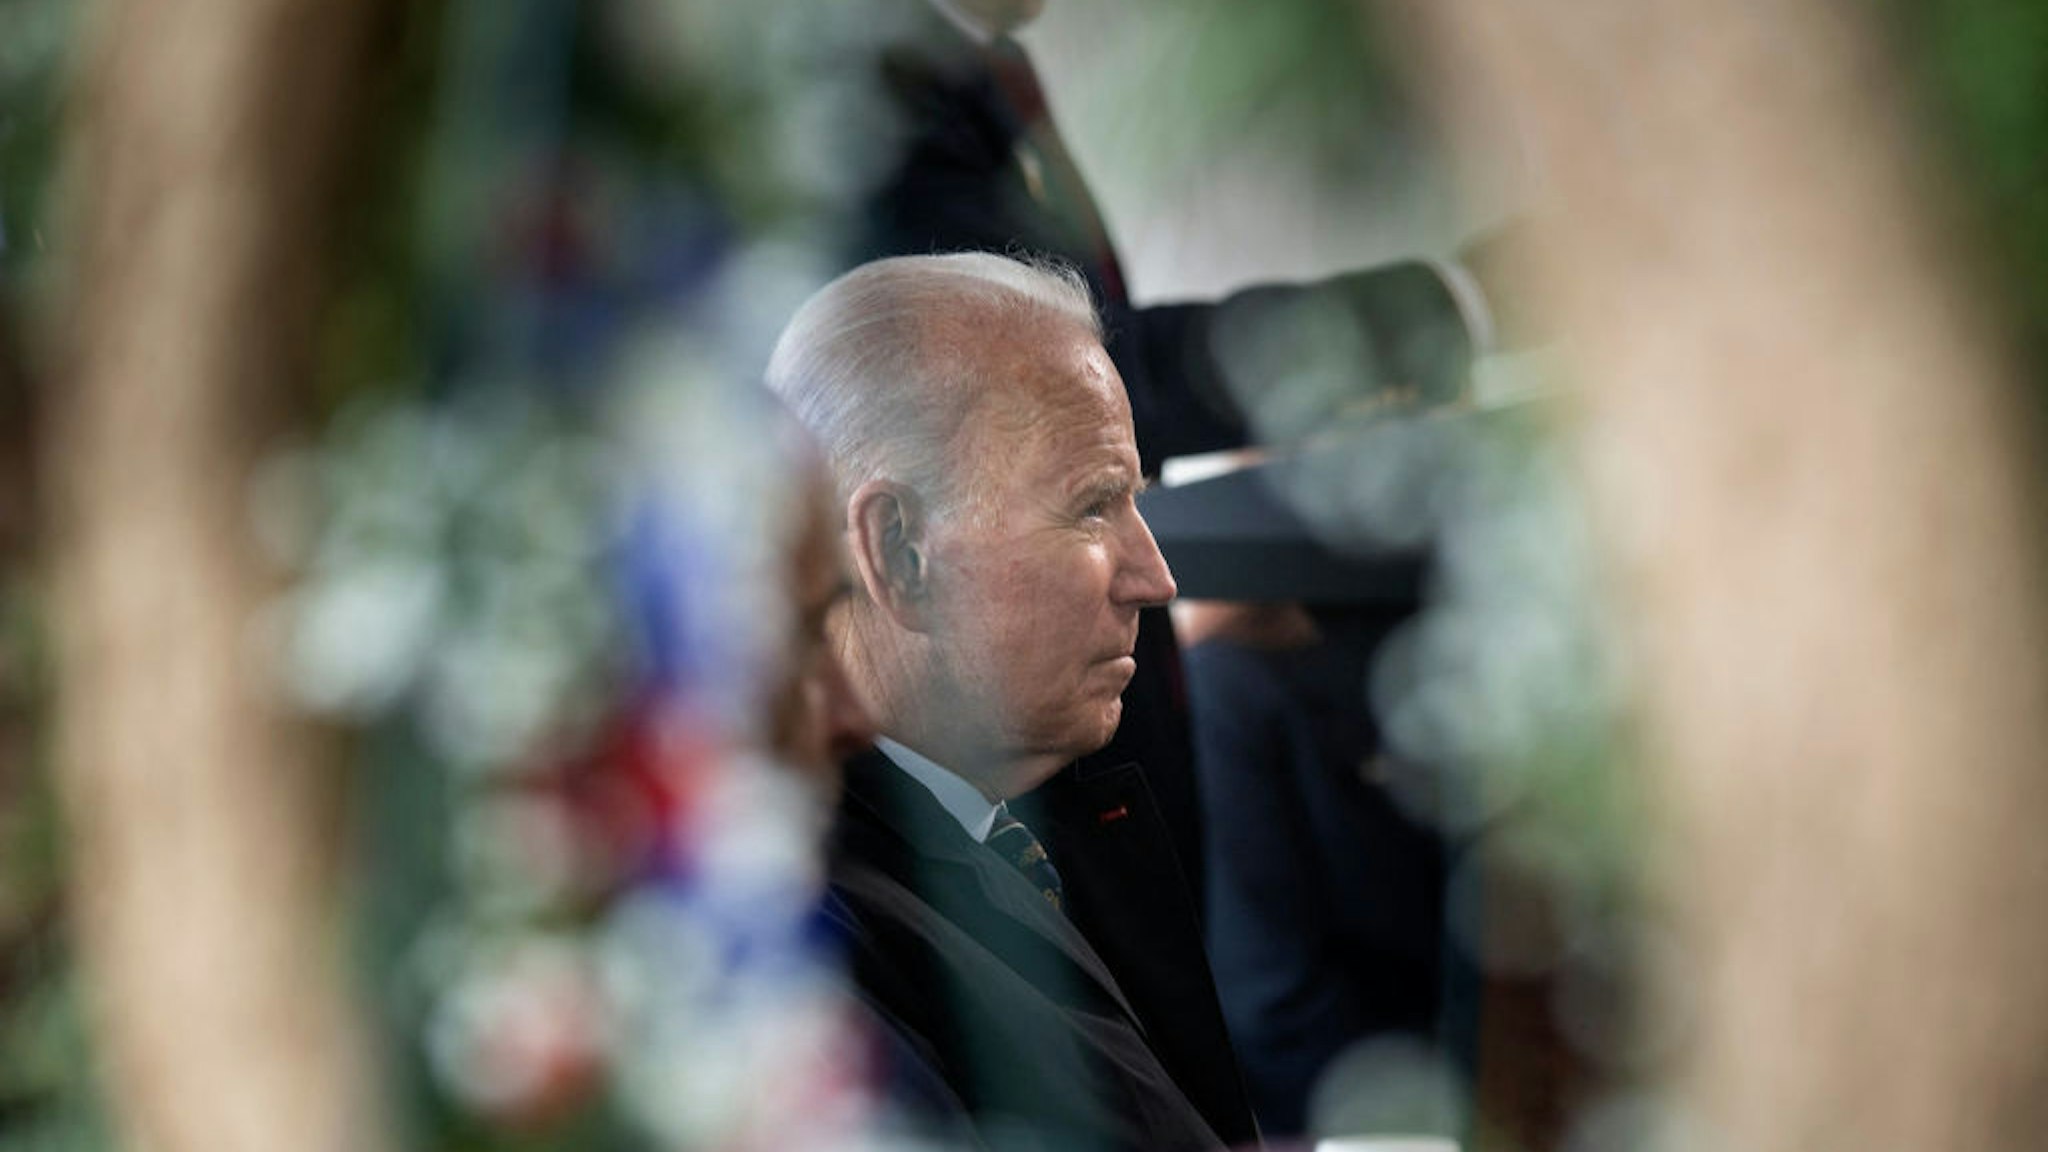 TOPSHOT - US President Joe Biden listens at Veterans Memorial Park during an annual Memorial Day Service on May 30, 2021 in New Castle, Delaware. (Photo by Brendan Smialowski / AFP) (Photo by BRENDAN SMIALOWSKI/AFP via Getty Images)